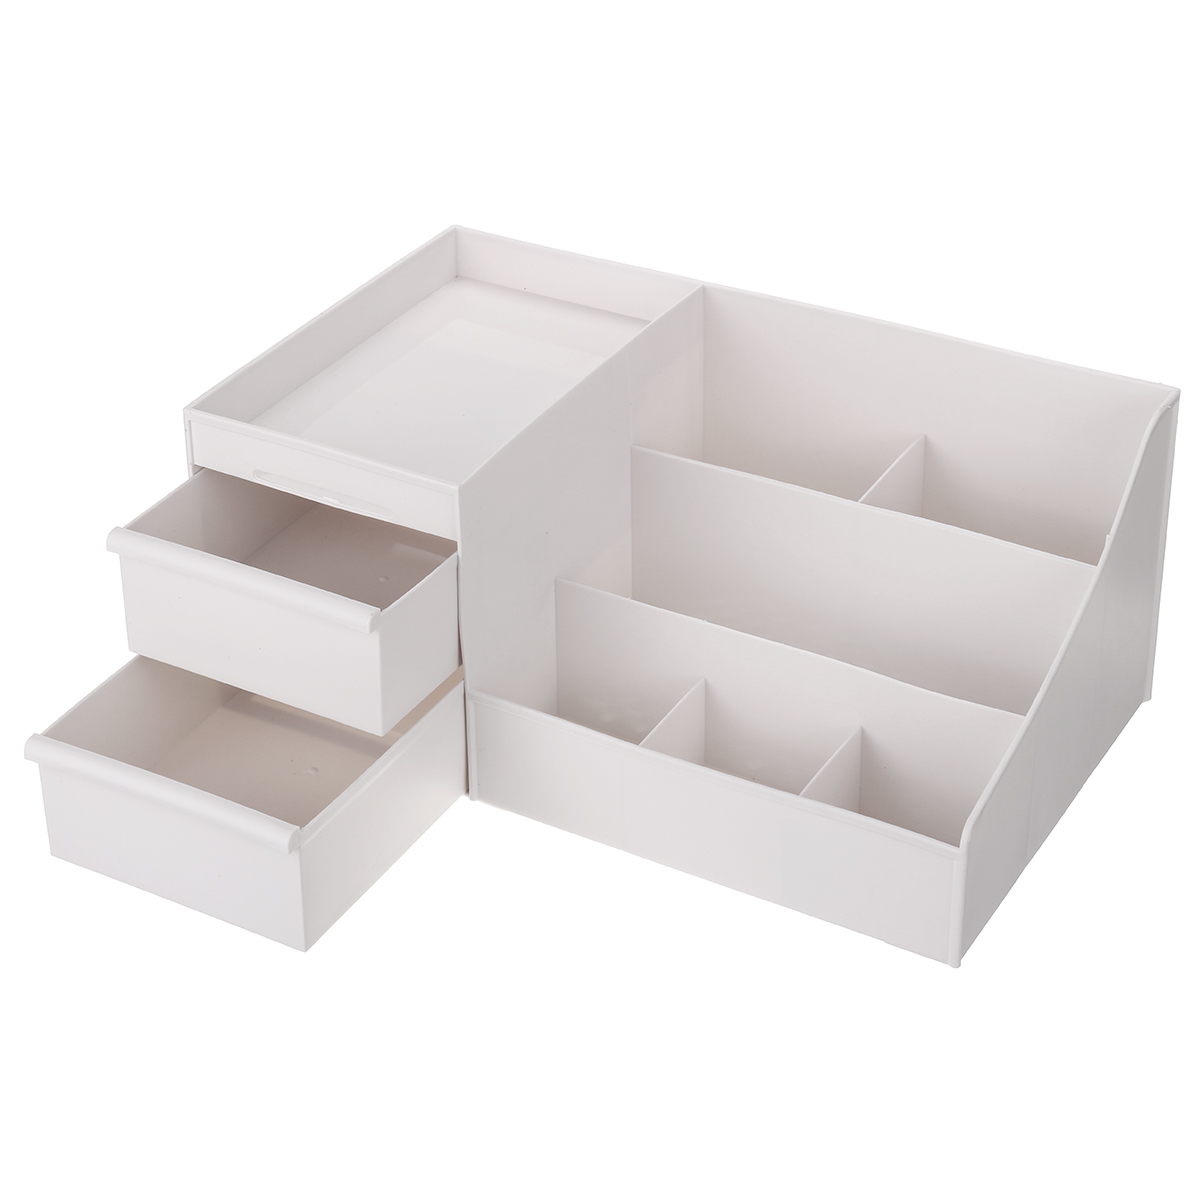 Plastic-Cosmetic-Makeup-Storage-Box-Organizer-Case-Holder-Jewelry-with-Drawer-1700918-8